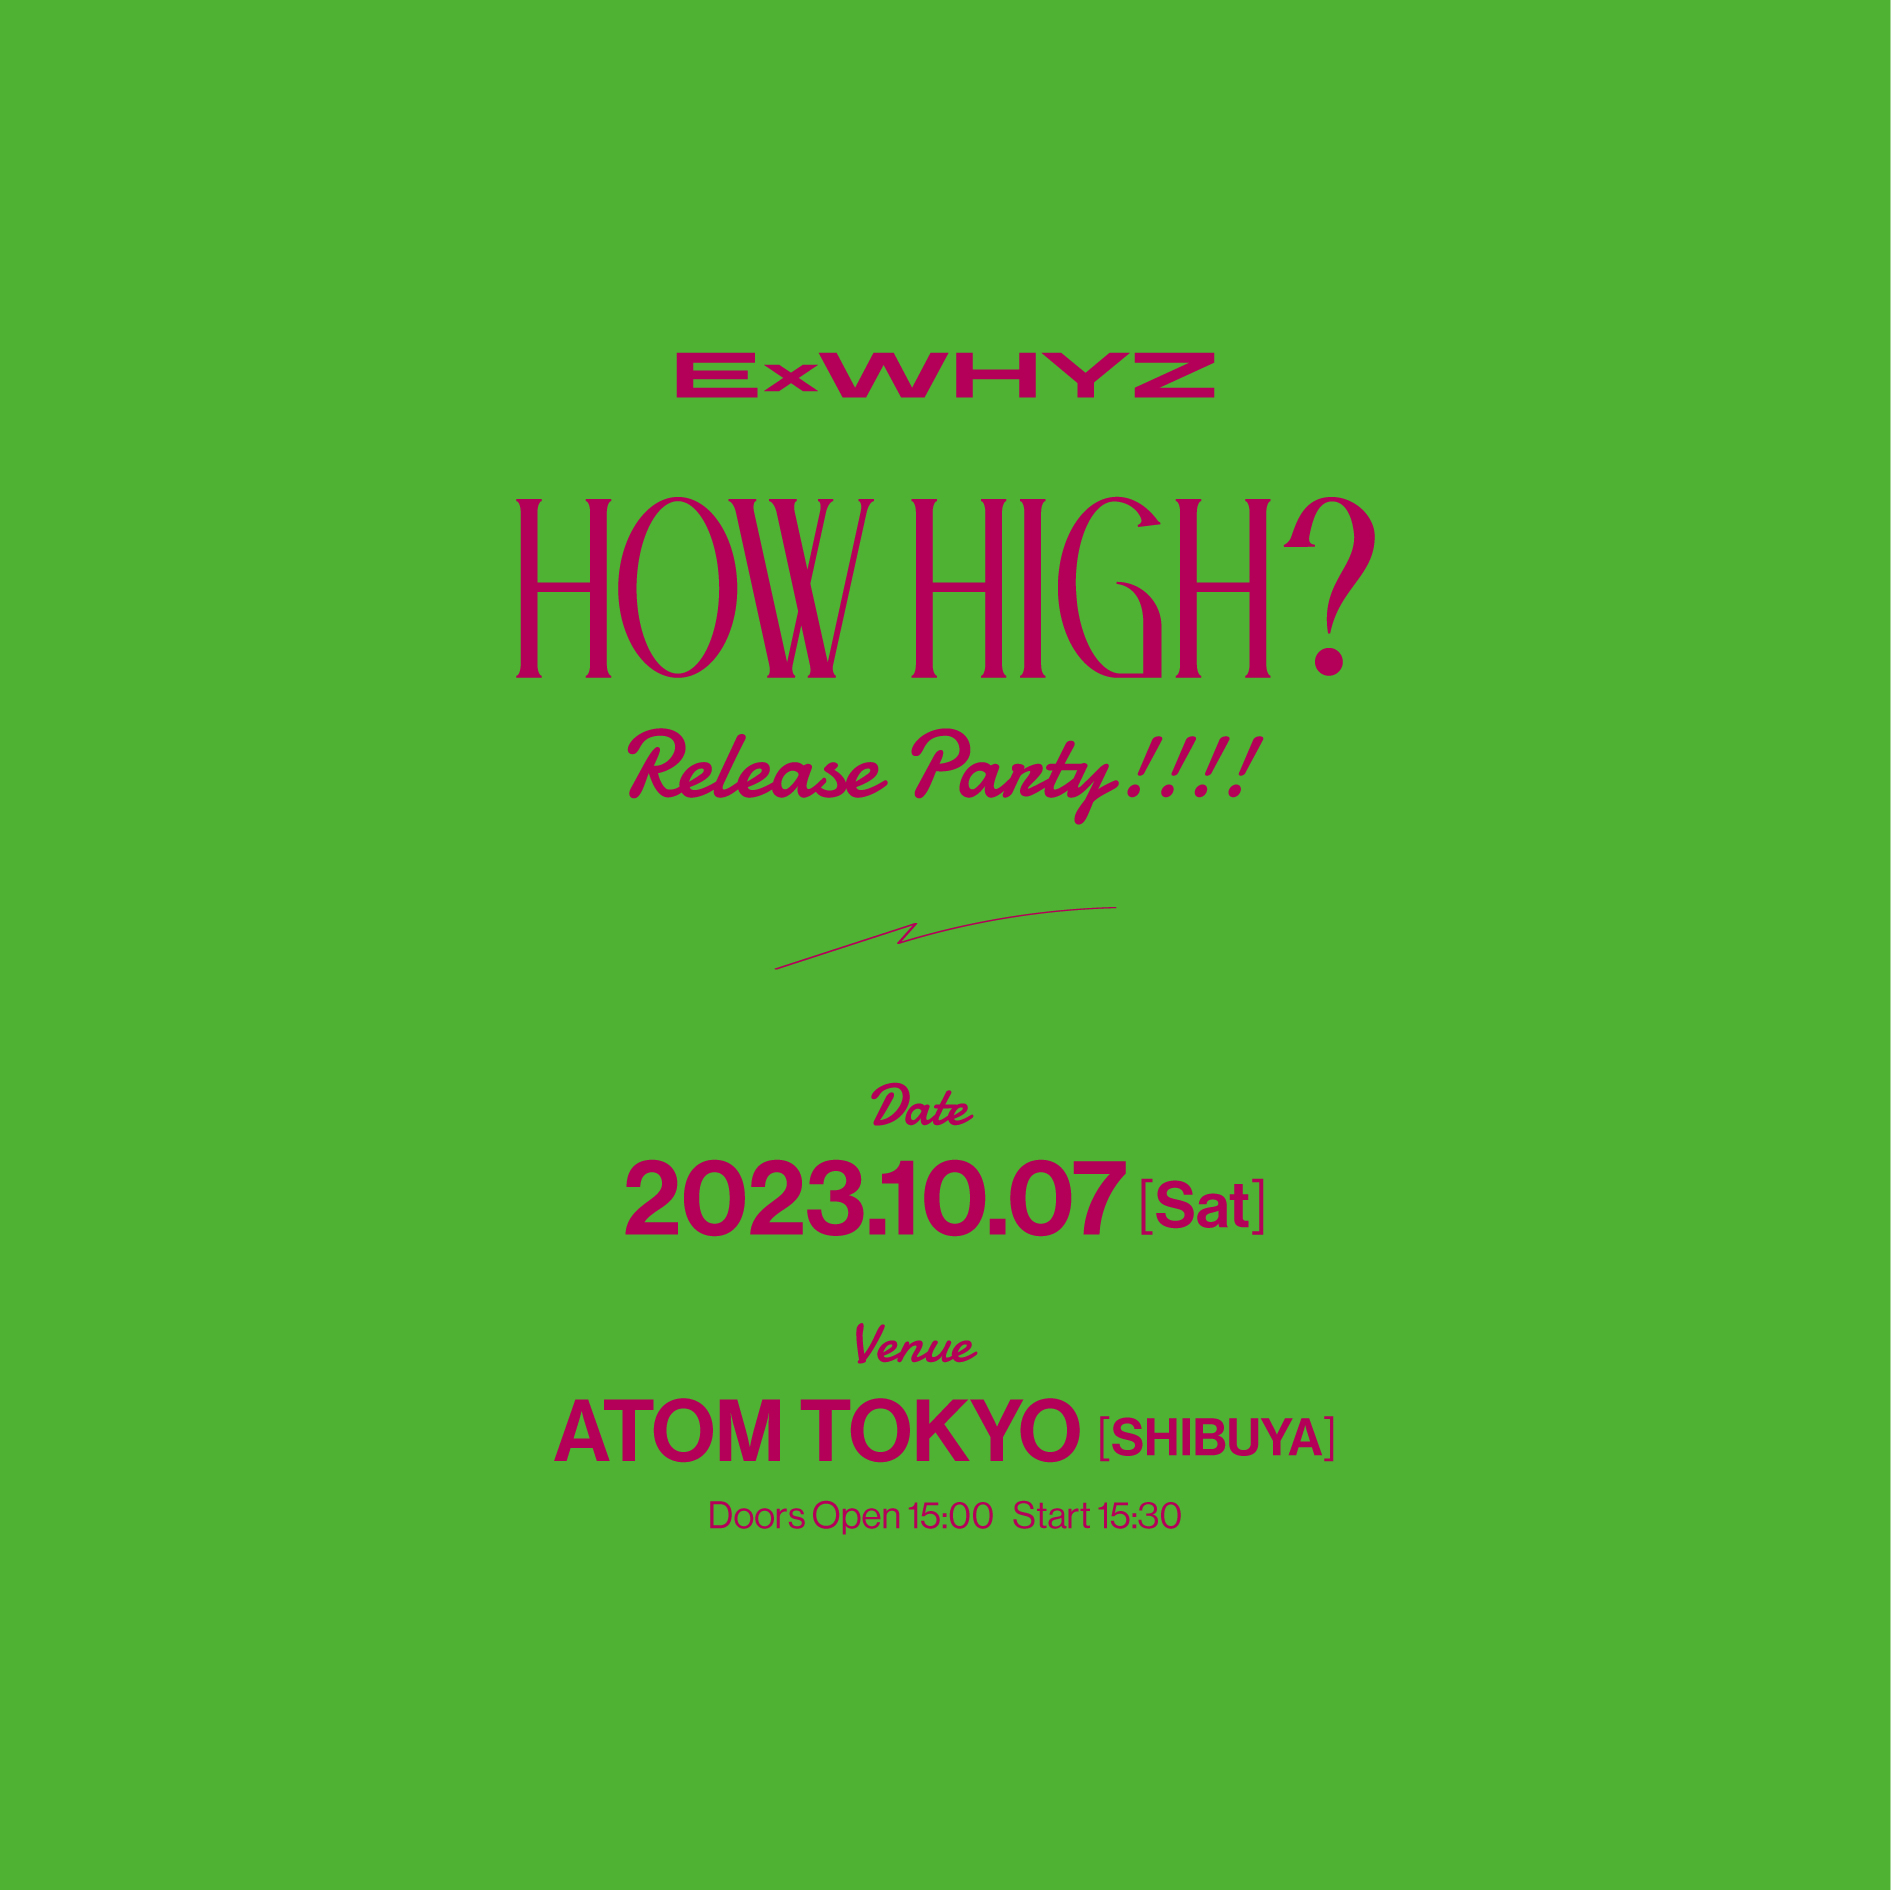 ExWHYZ presents HOW HIGH? RELEASE PARTY!!!!!